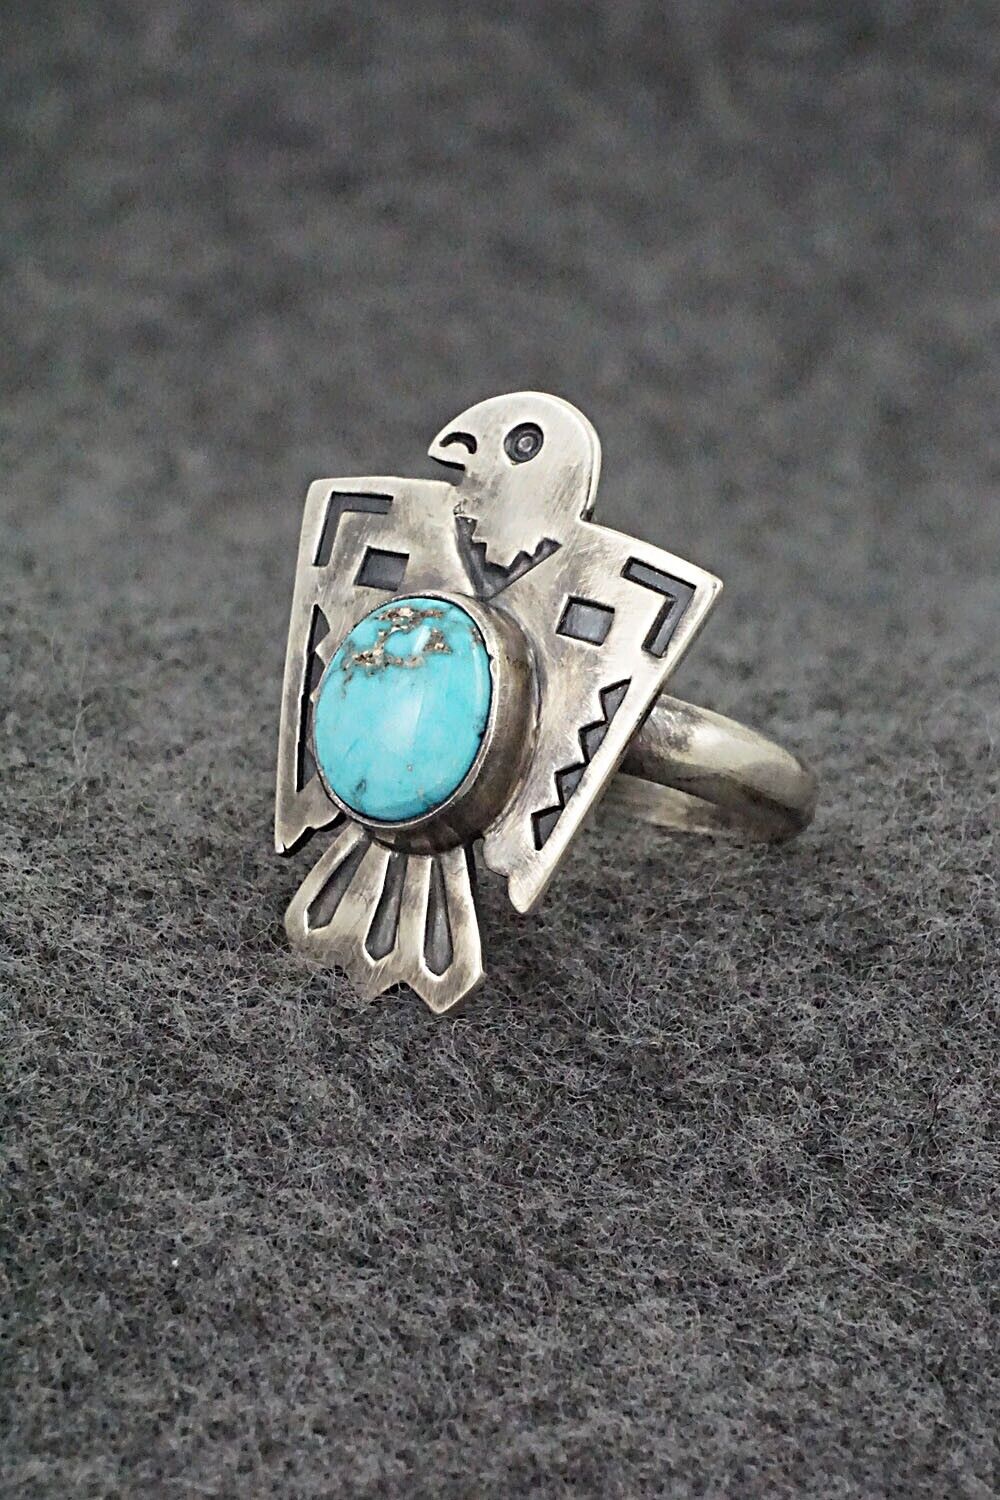 Turquoise and Sterling Silver Ring - Raymond Coriz - Size 8